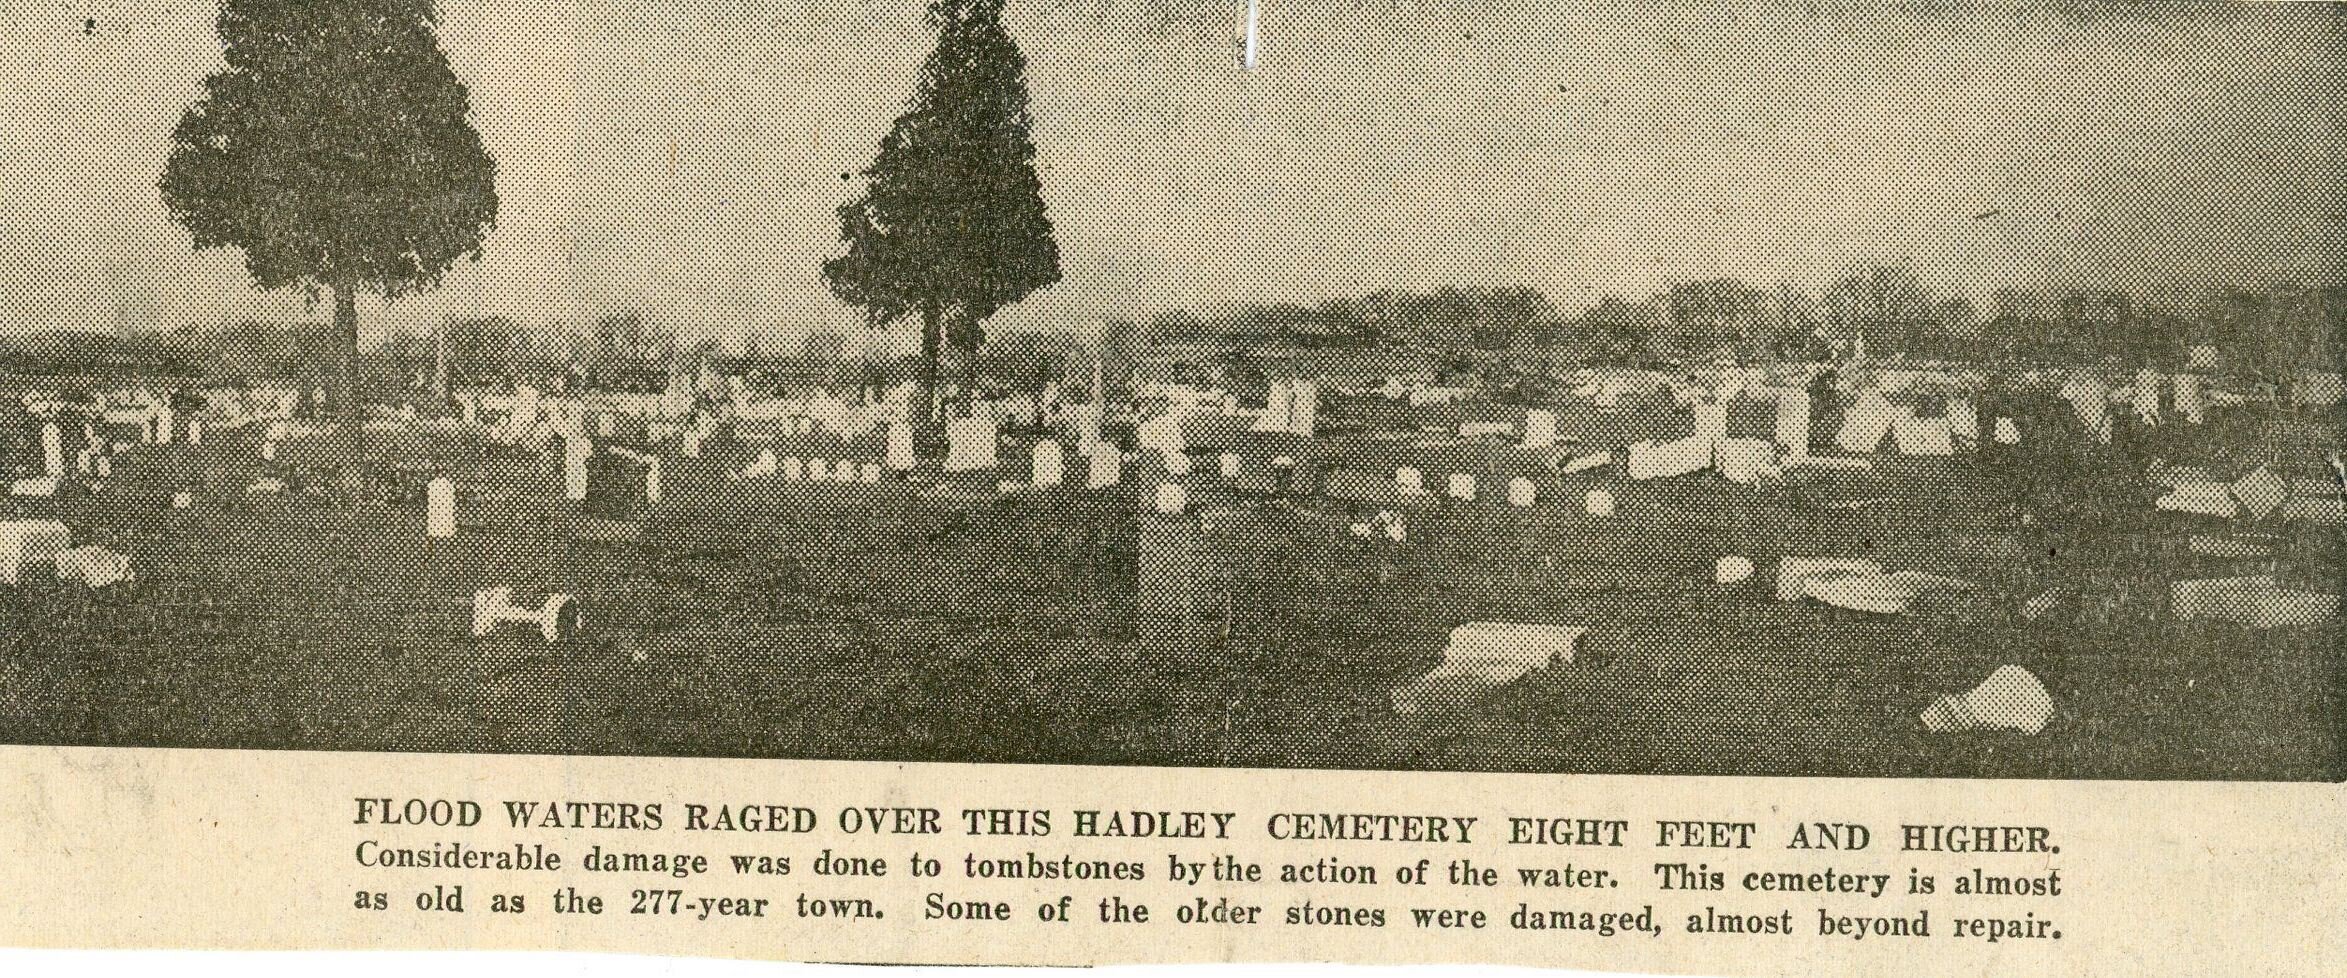 The local newspaper on the Hadley cemetery in the wake of the flood